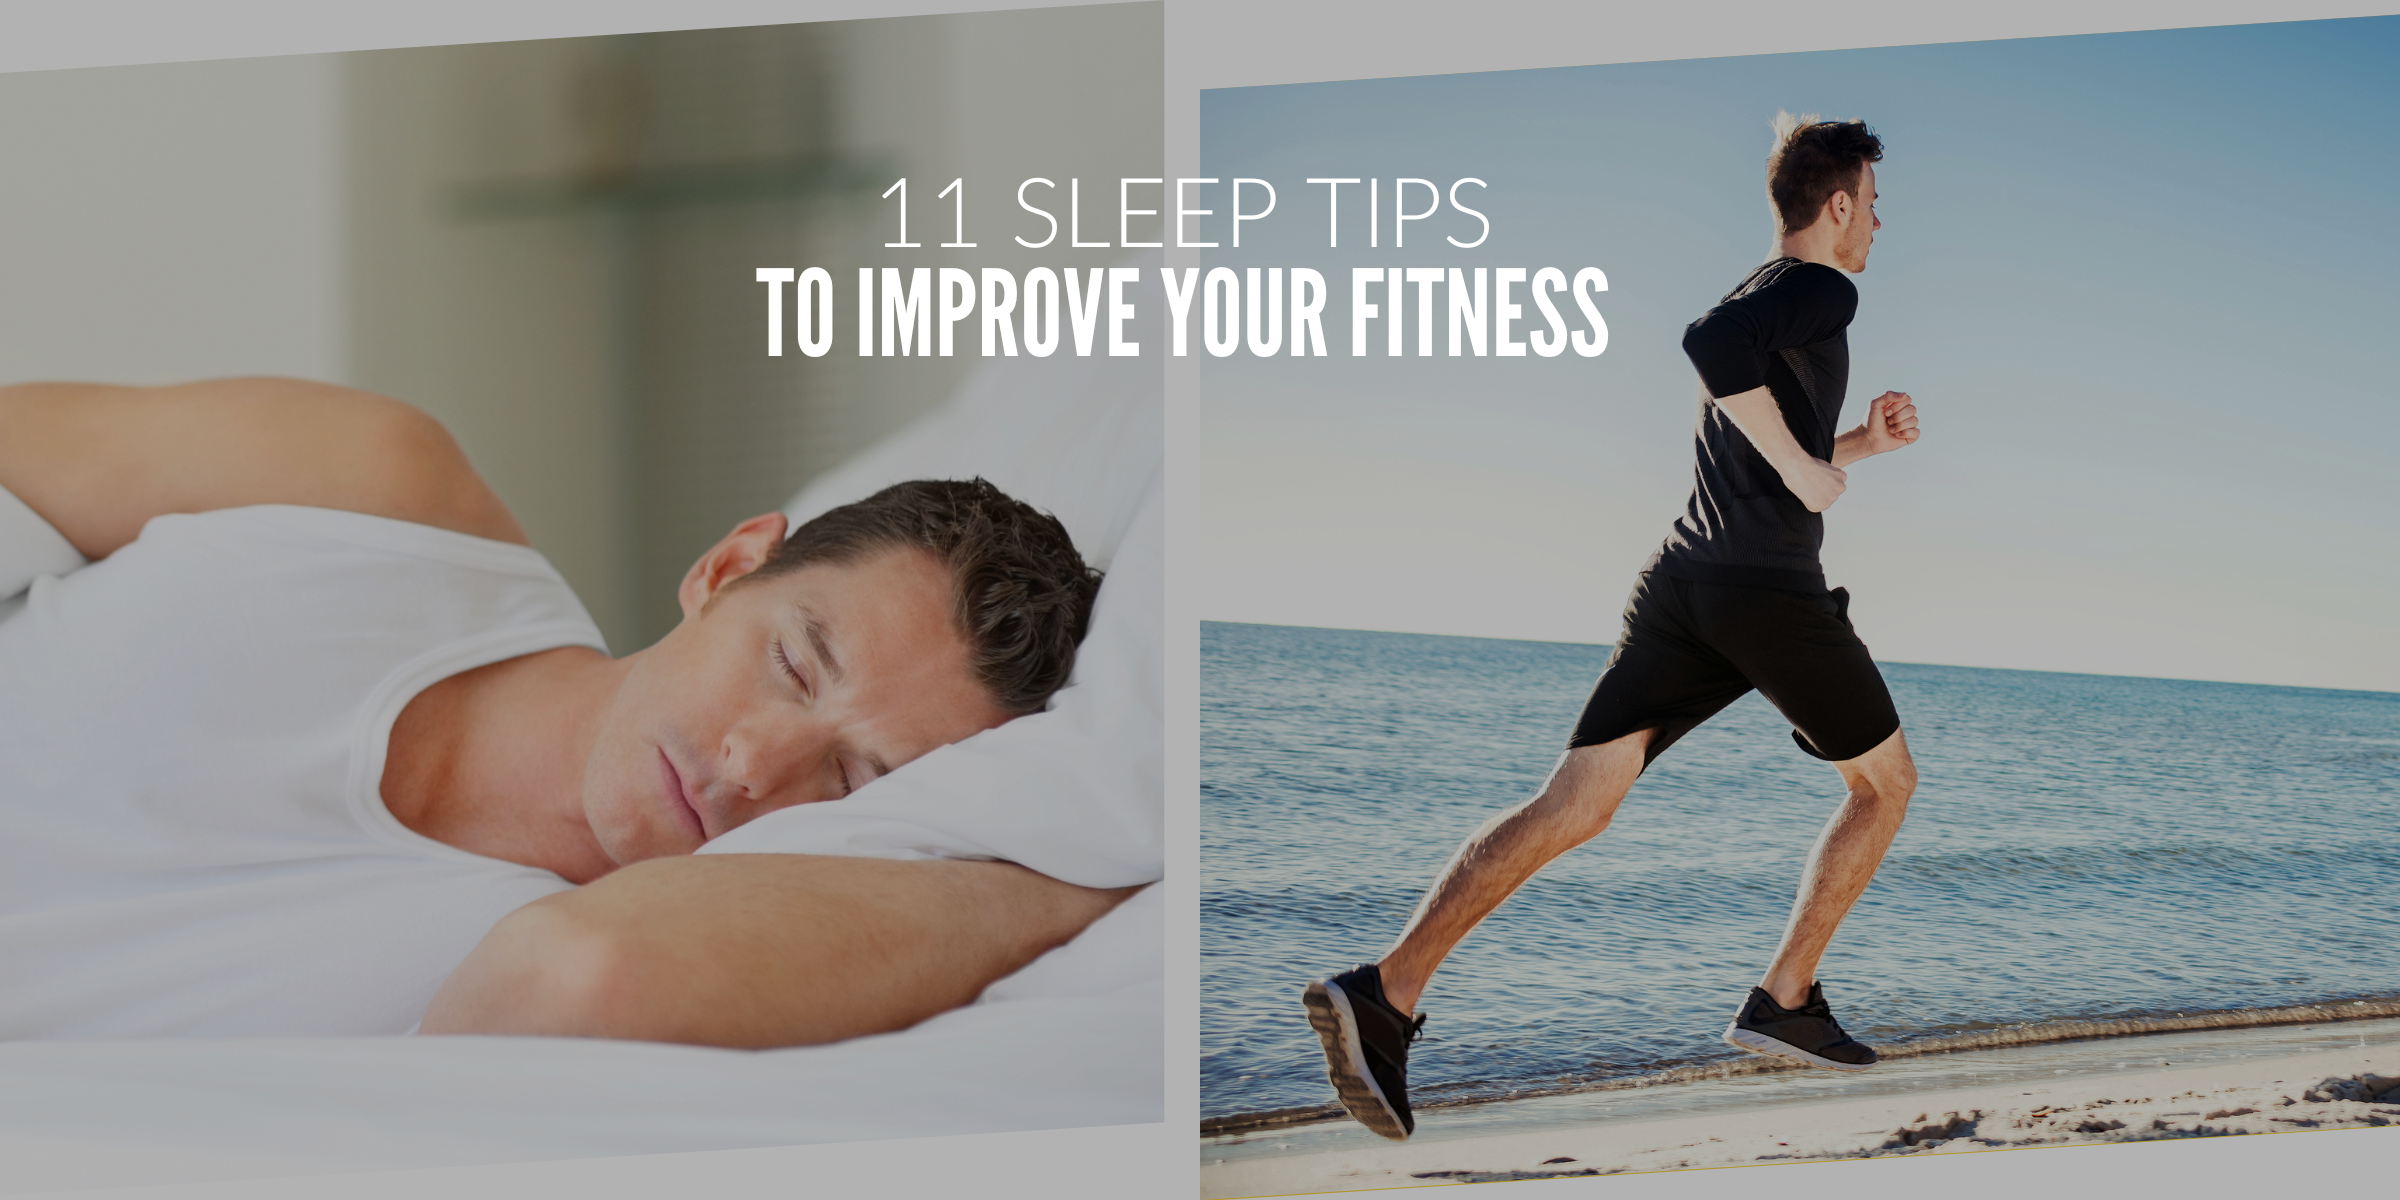 Try These 11 Sleep Hacks to Improve Your Fitness